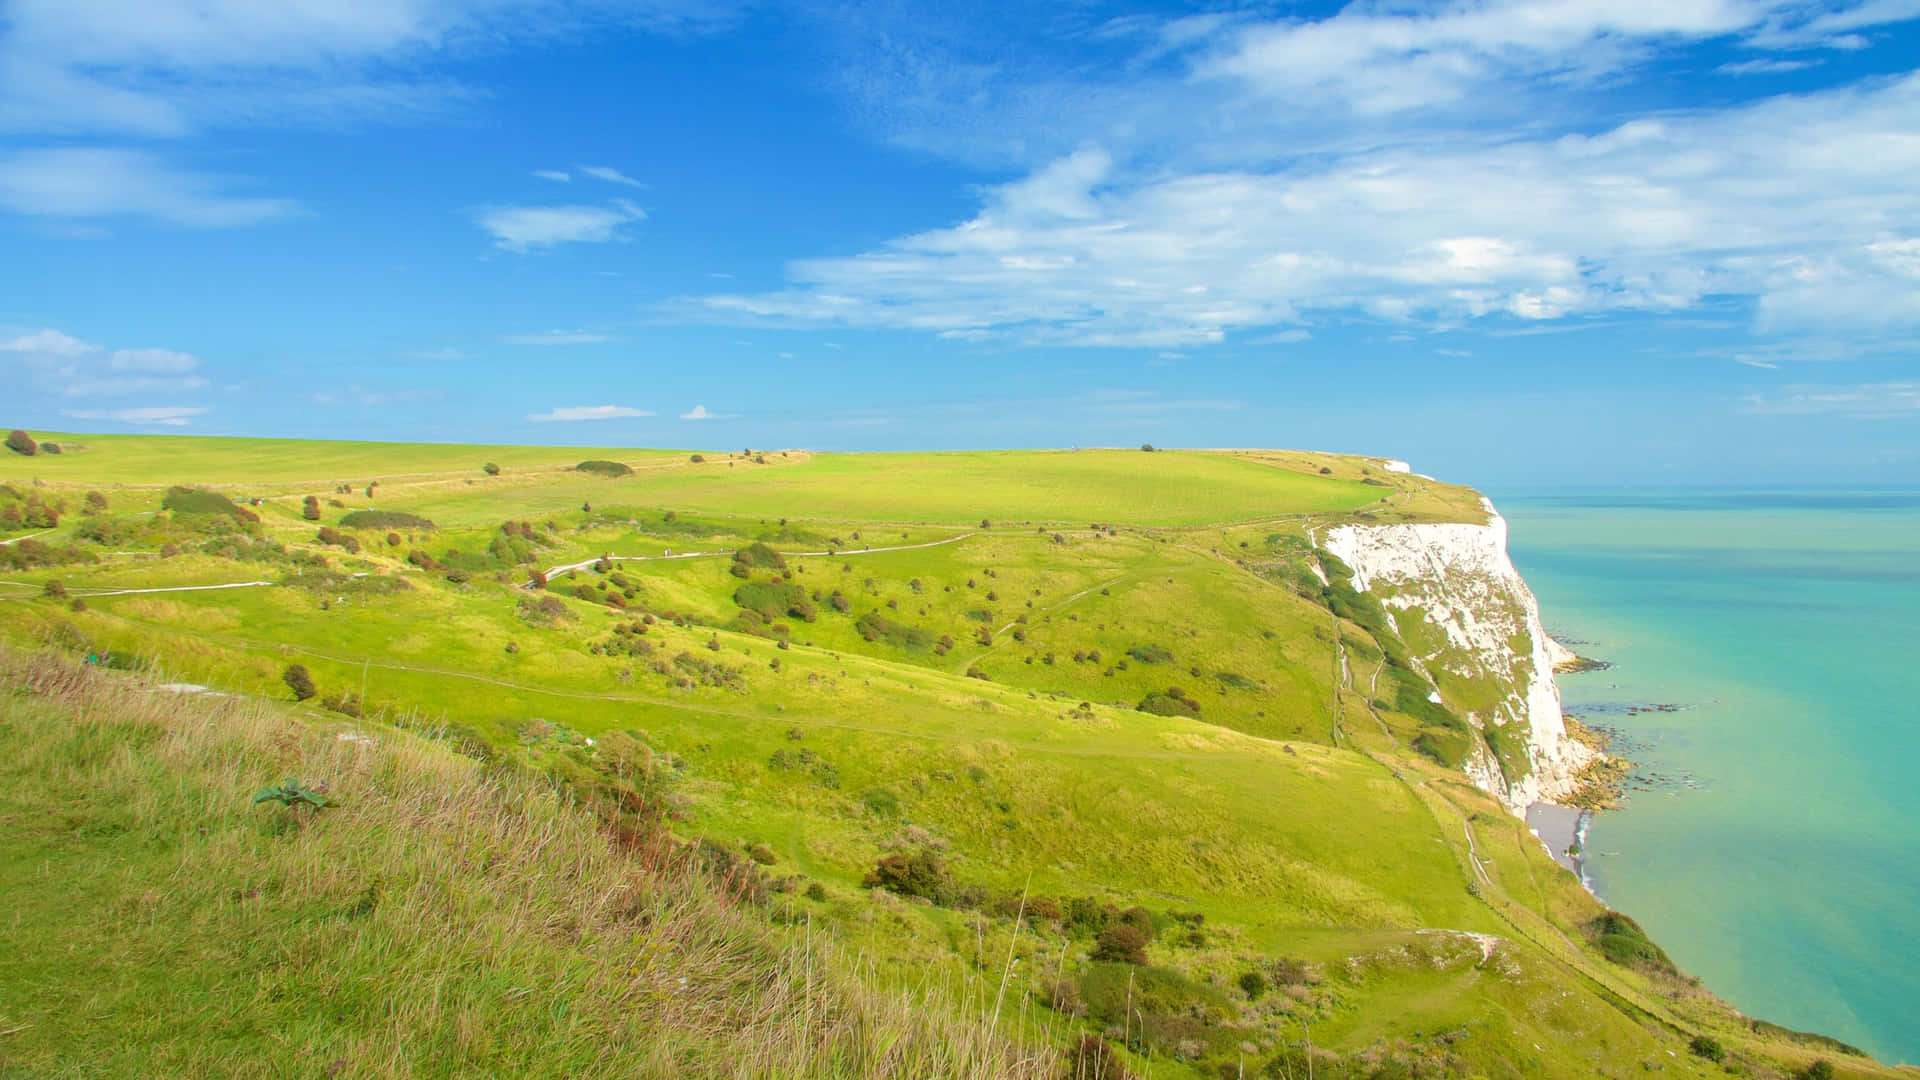 Download Grassland On White Cliffs Of Dover Wallpaper | Wallpapers.com